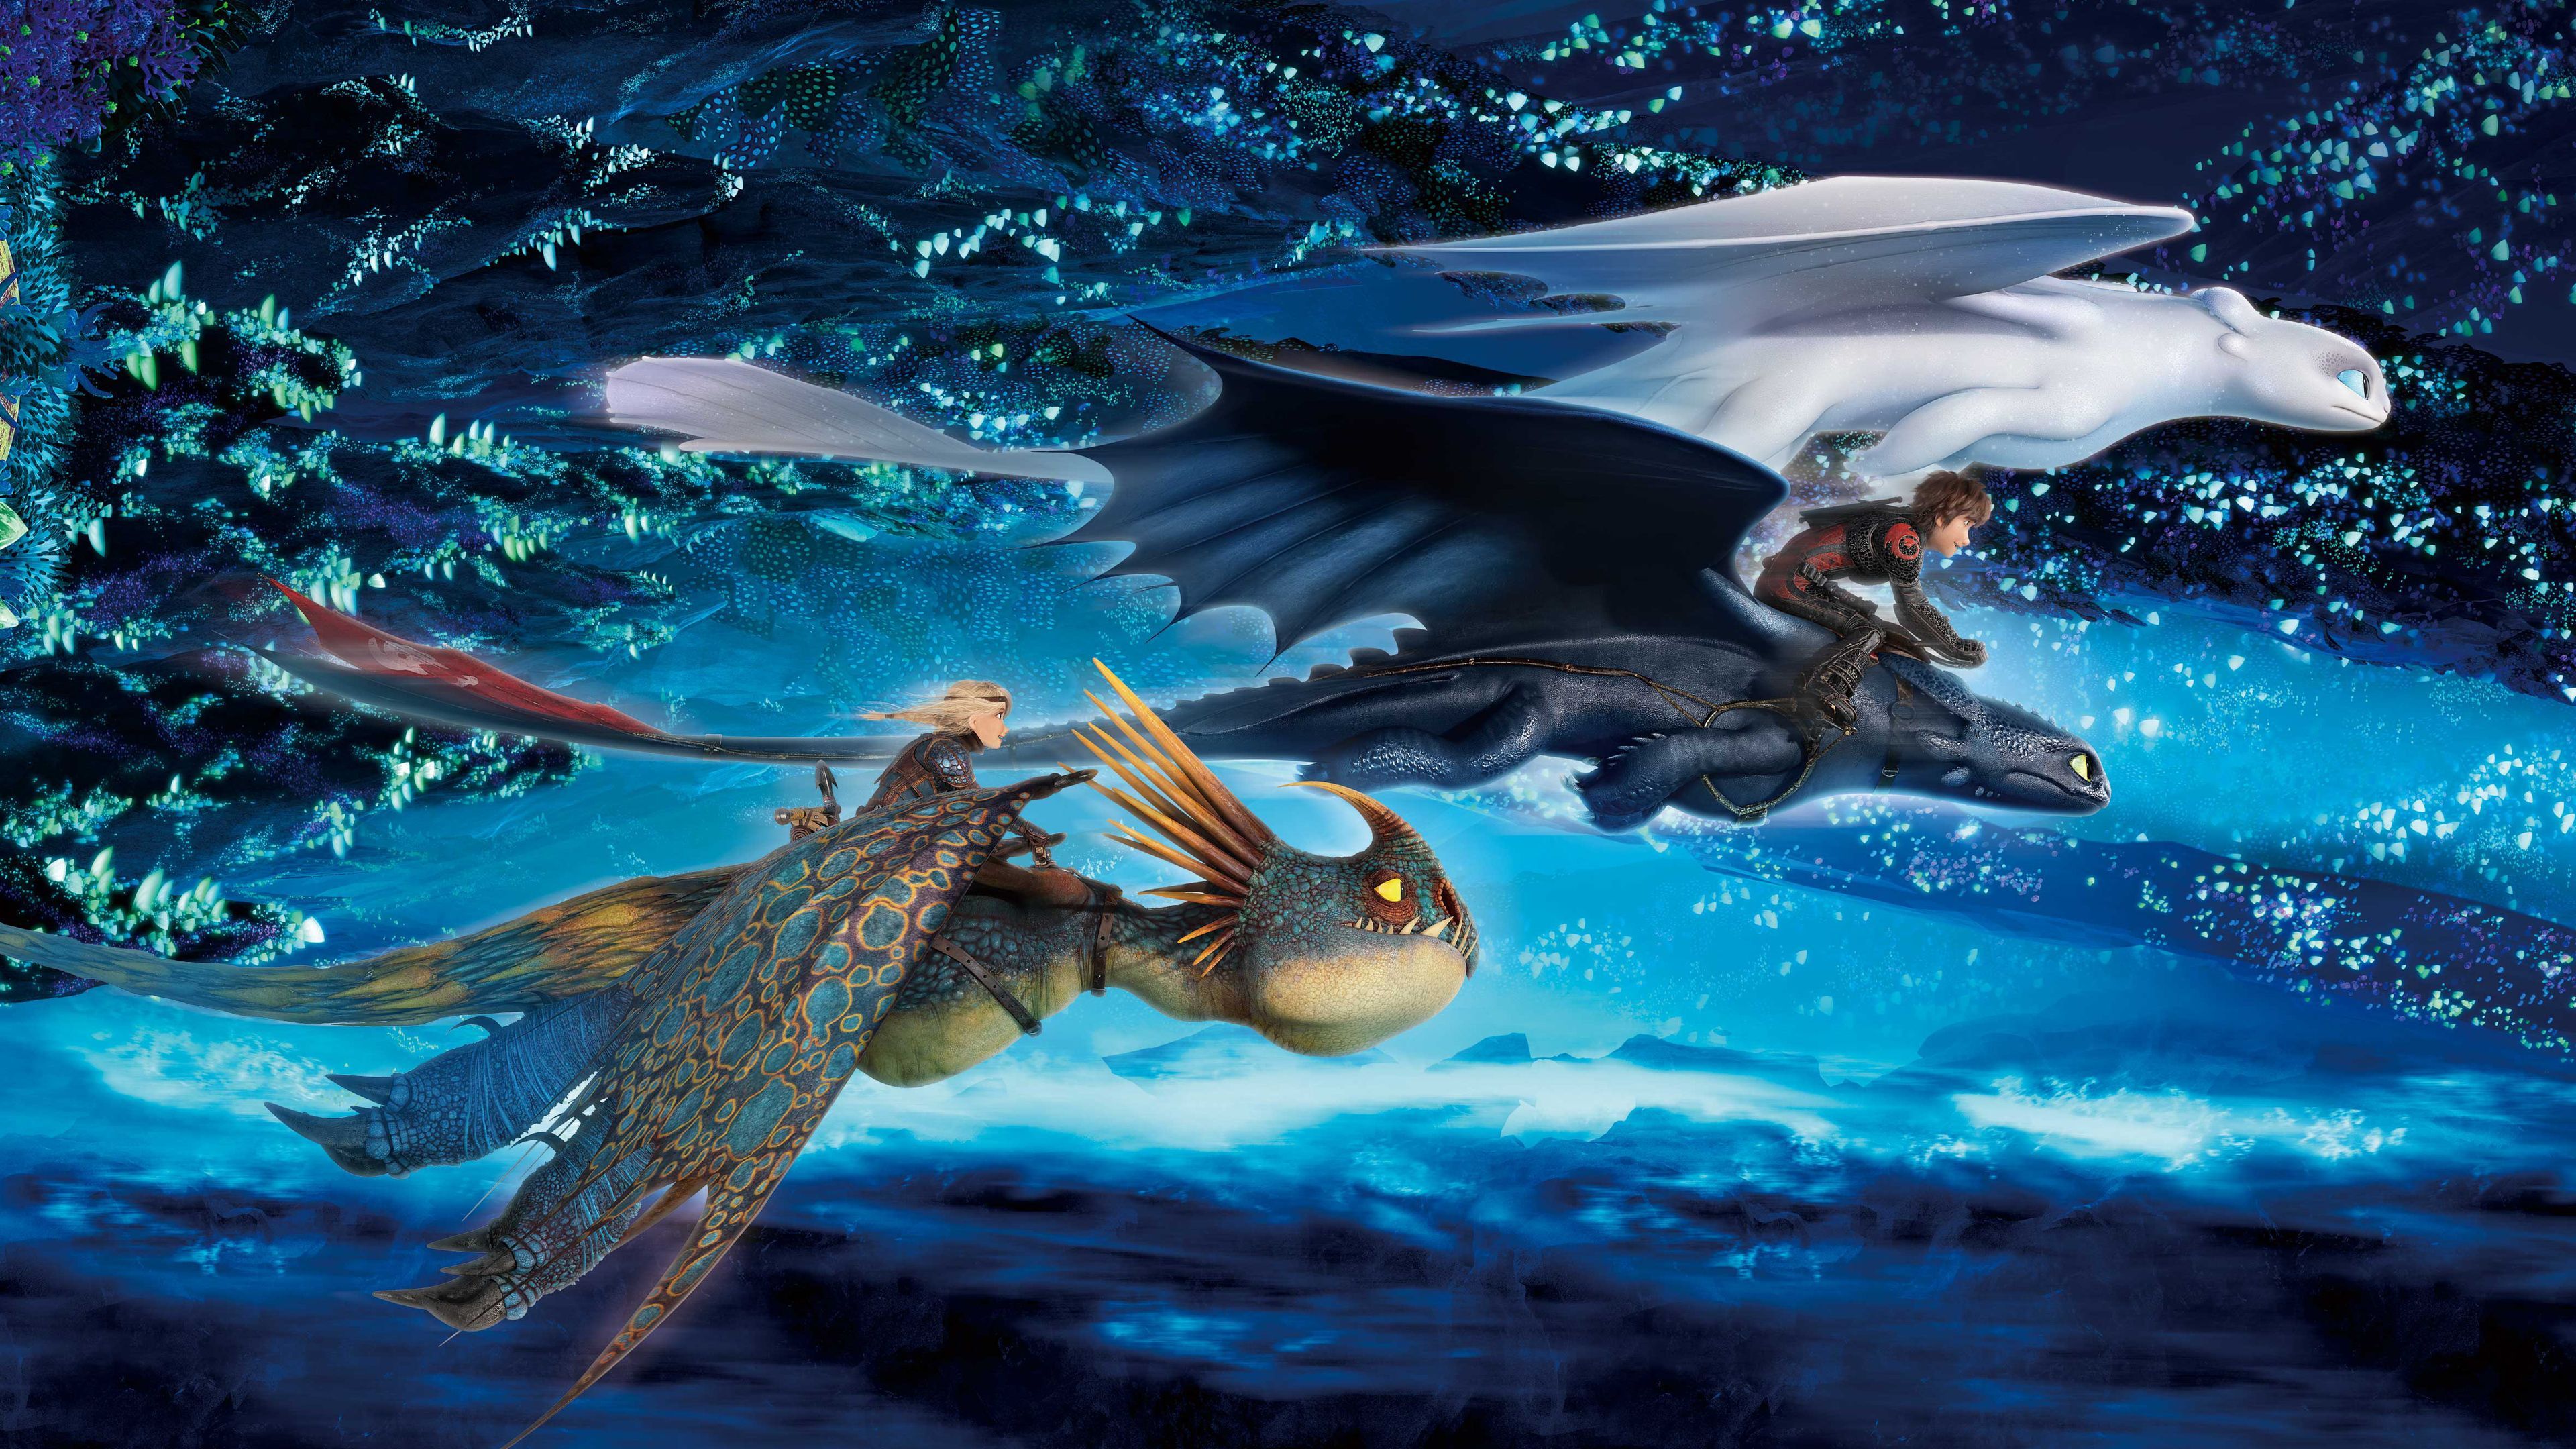 How To Train Your Dragon The Hidden World Imax movies wallpaper, light fury wallpaper, how to. How train your dragon, How to train your dragon, World wallpaper